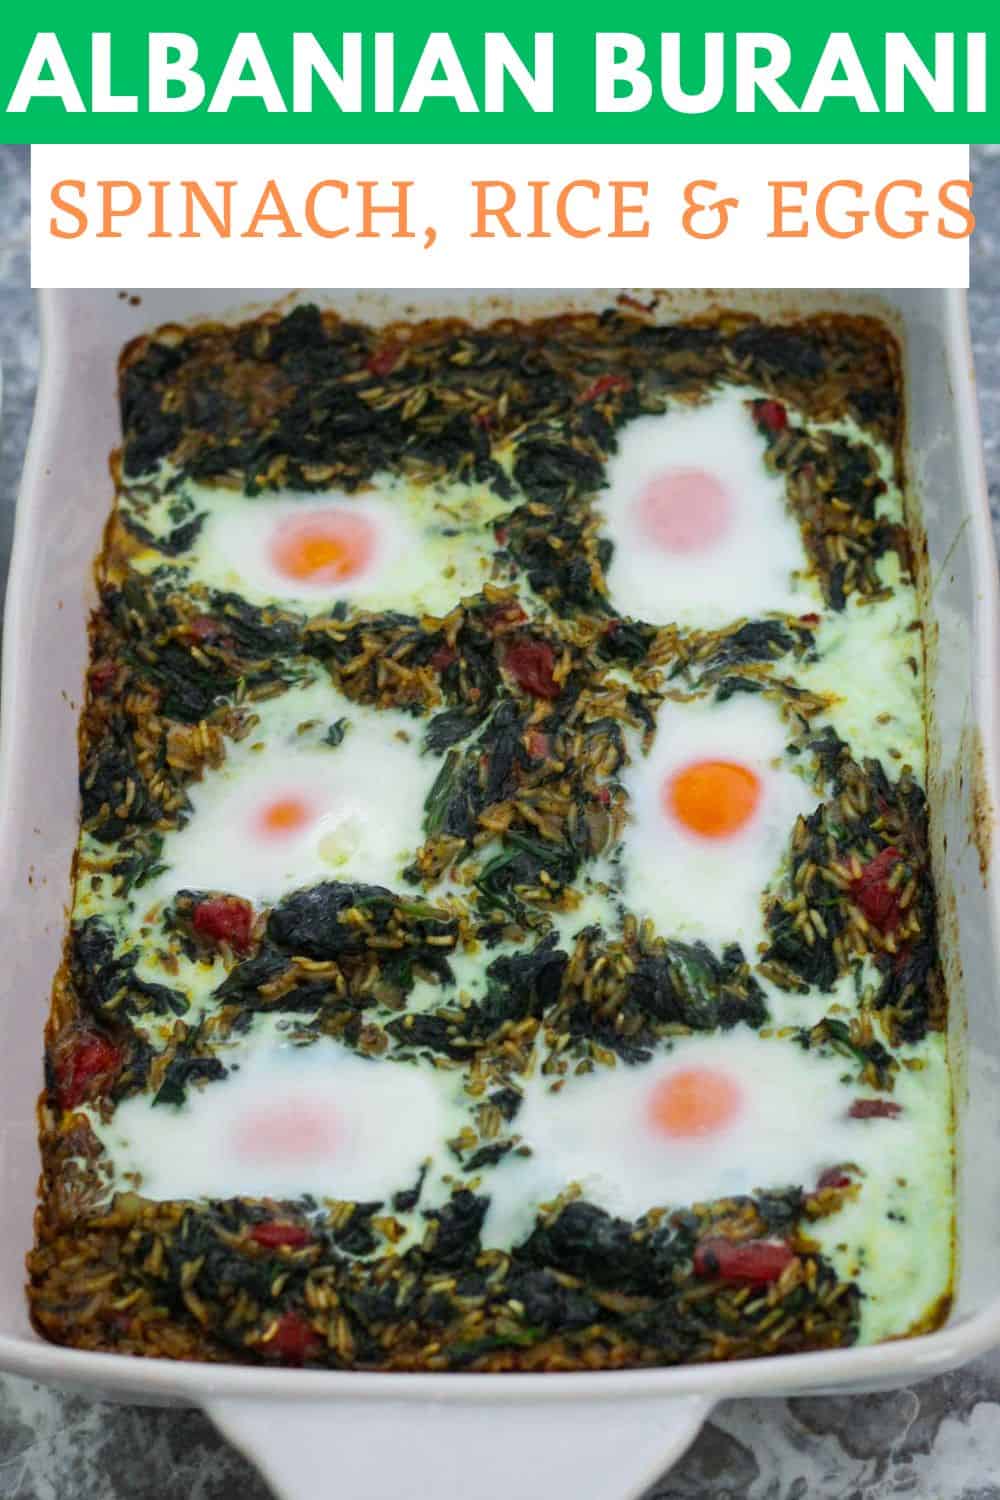 An image prepared for Pinterest, it shows a baked spinach dish with eggs on top. It has a title bar on top of the picture.